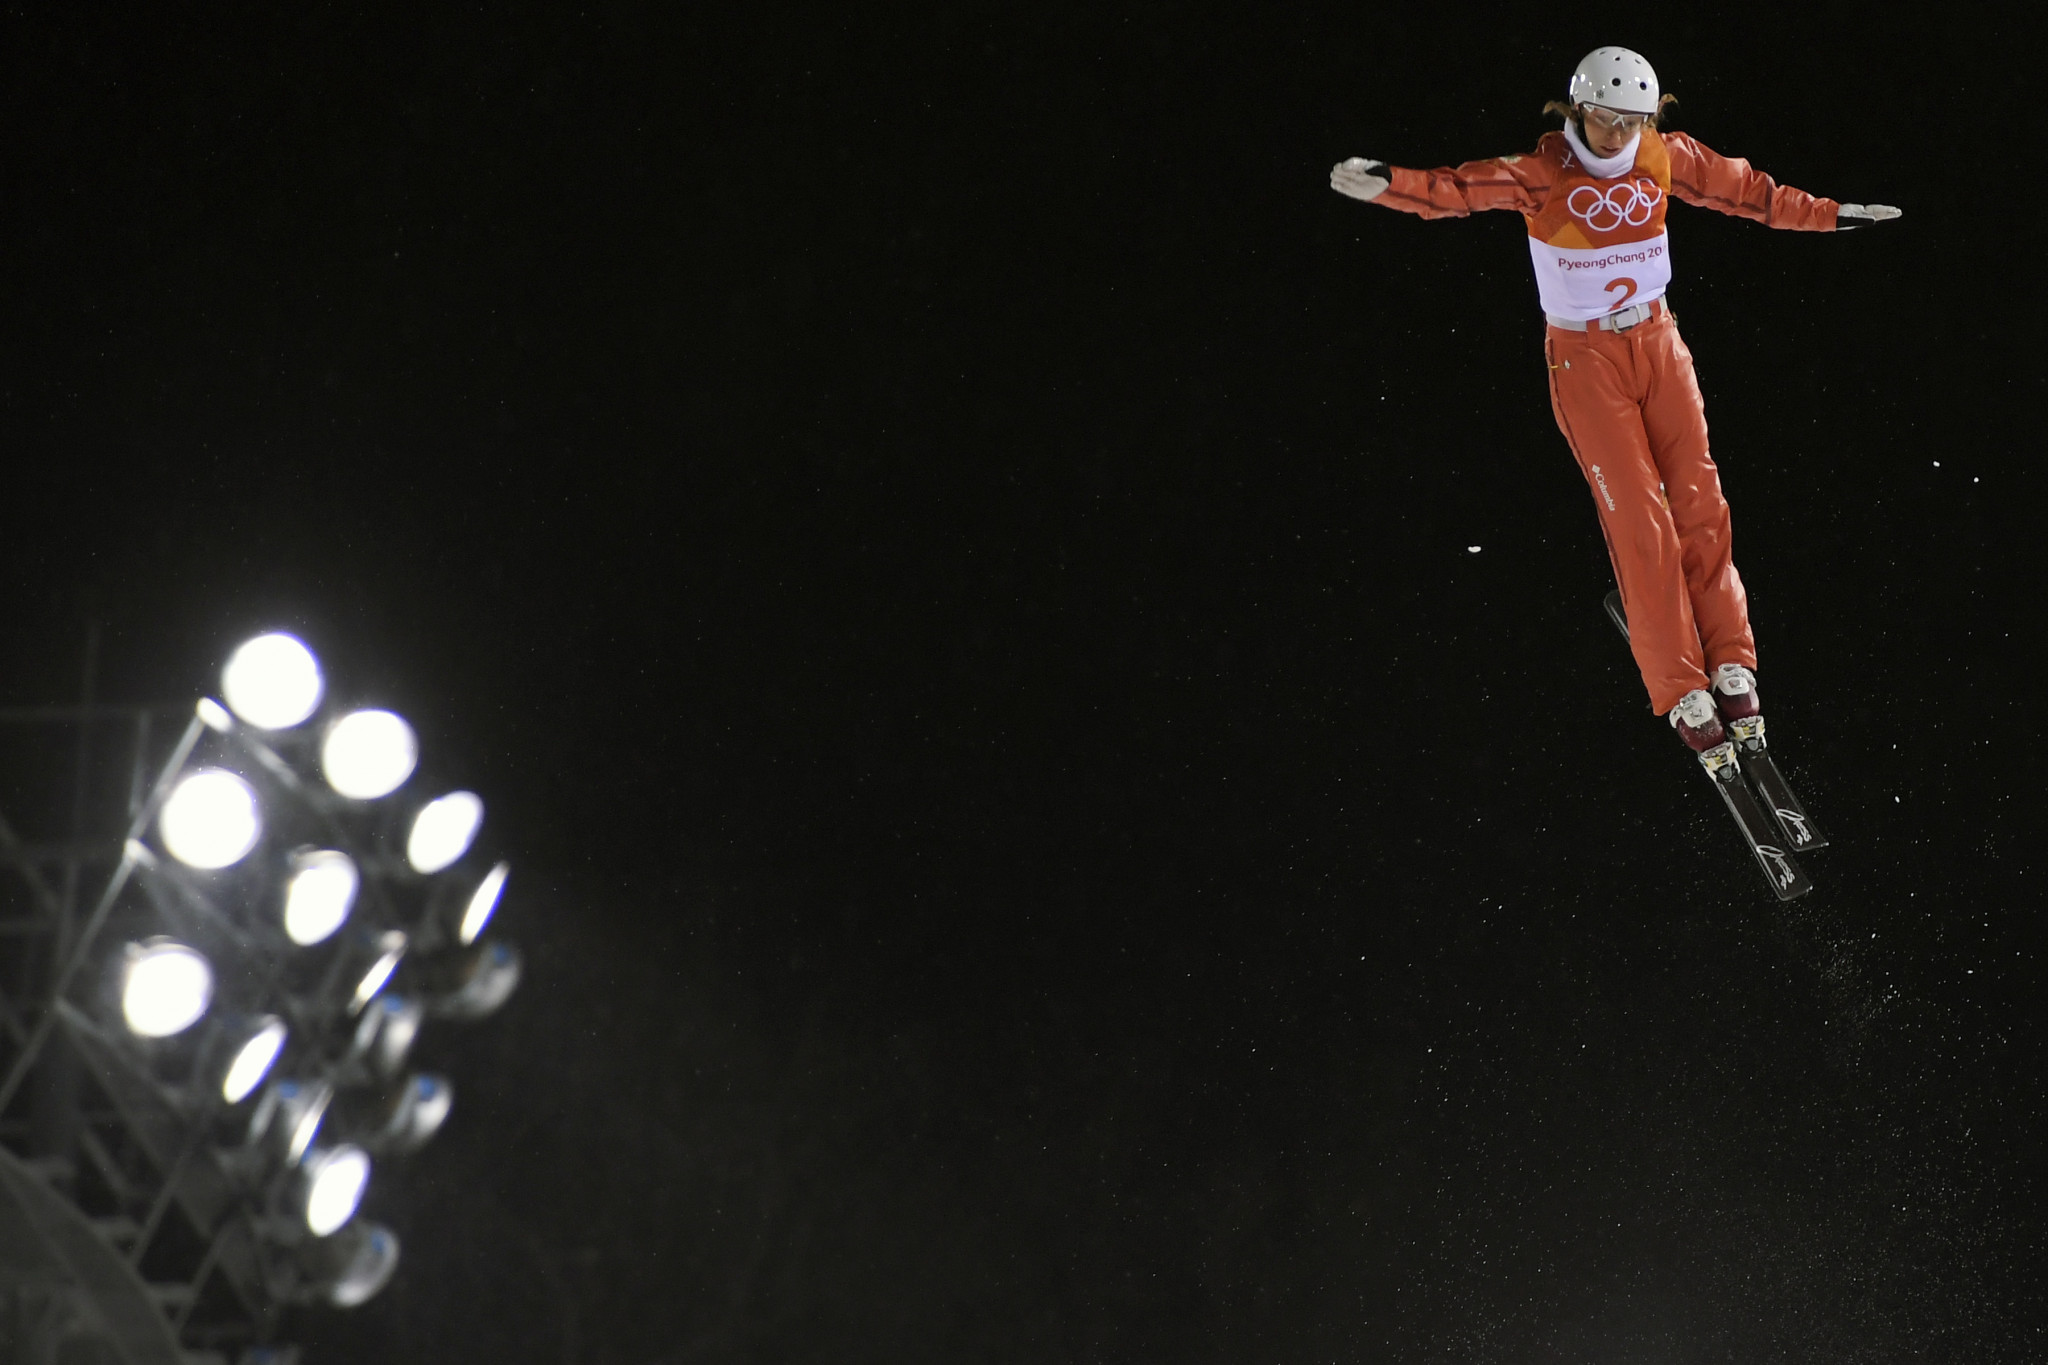 Hanna Huskova won the women's aerials in a competition taking place amid strong winds ©Getty Images